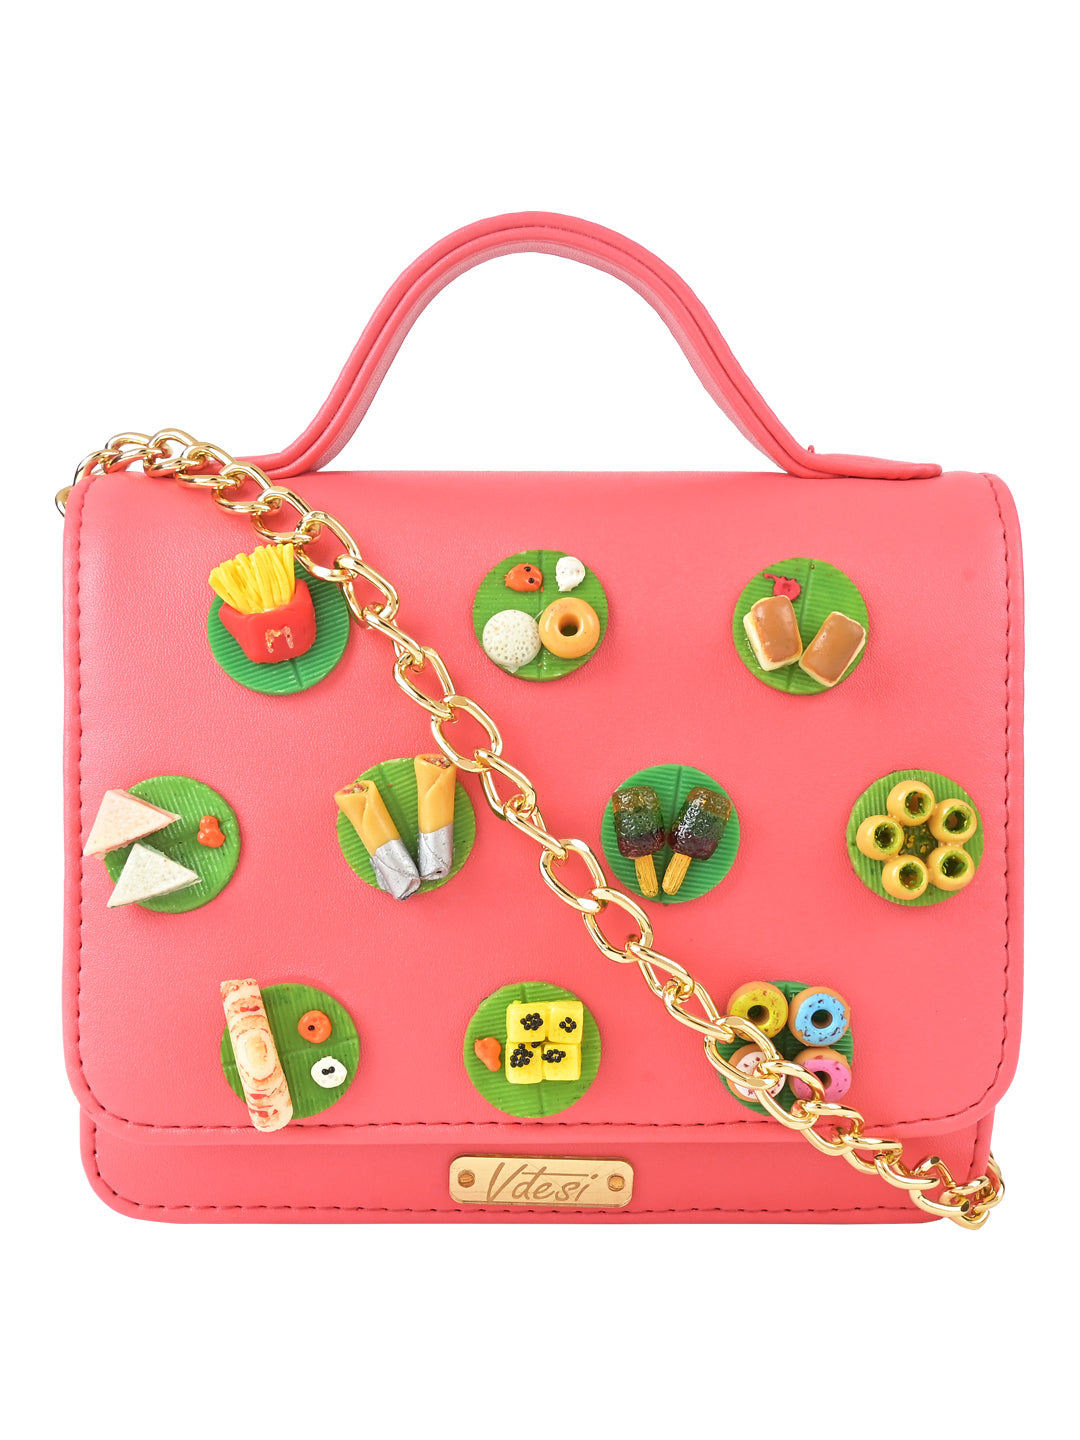 A Perfect bag for all the foodies out there.